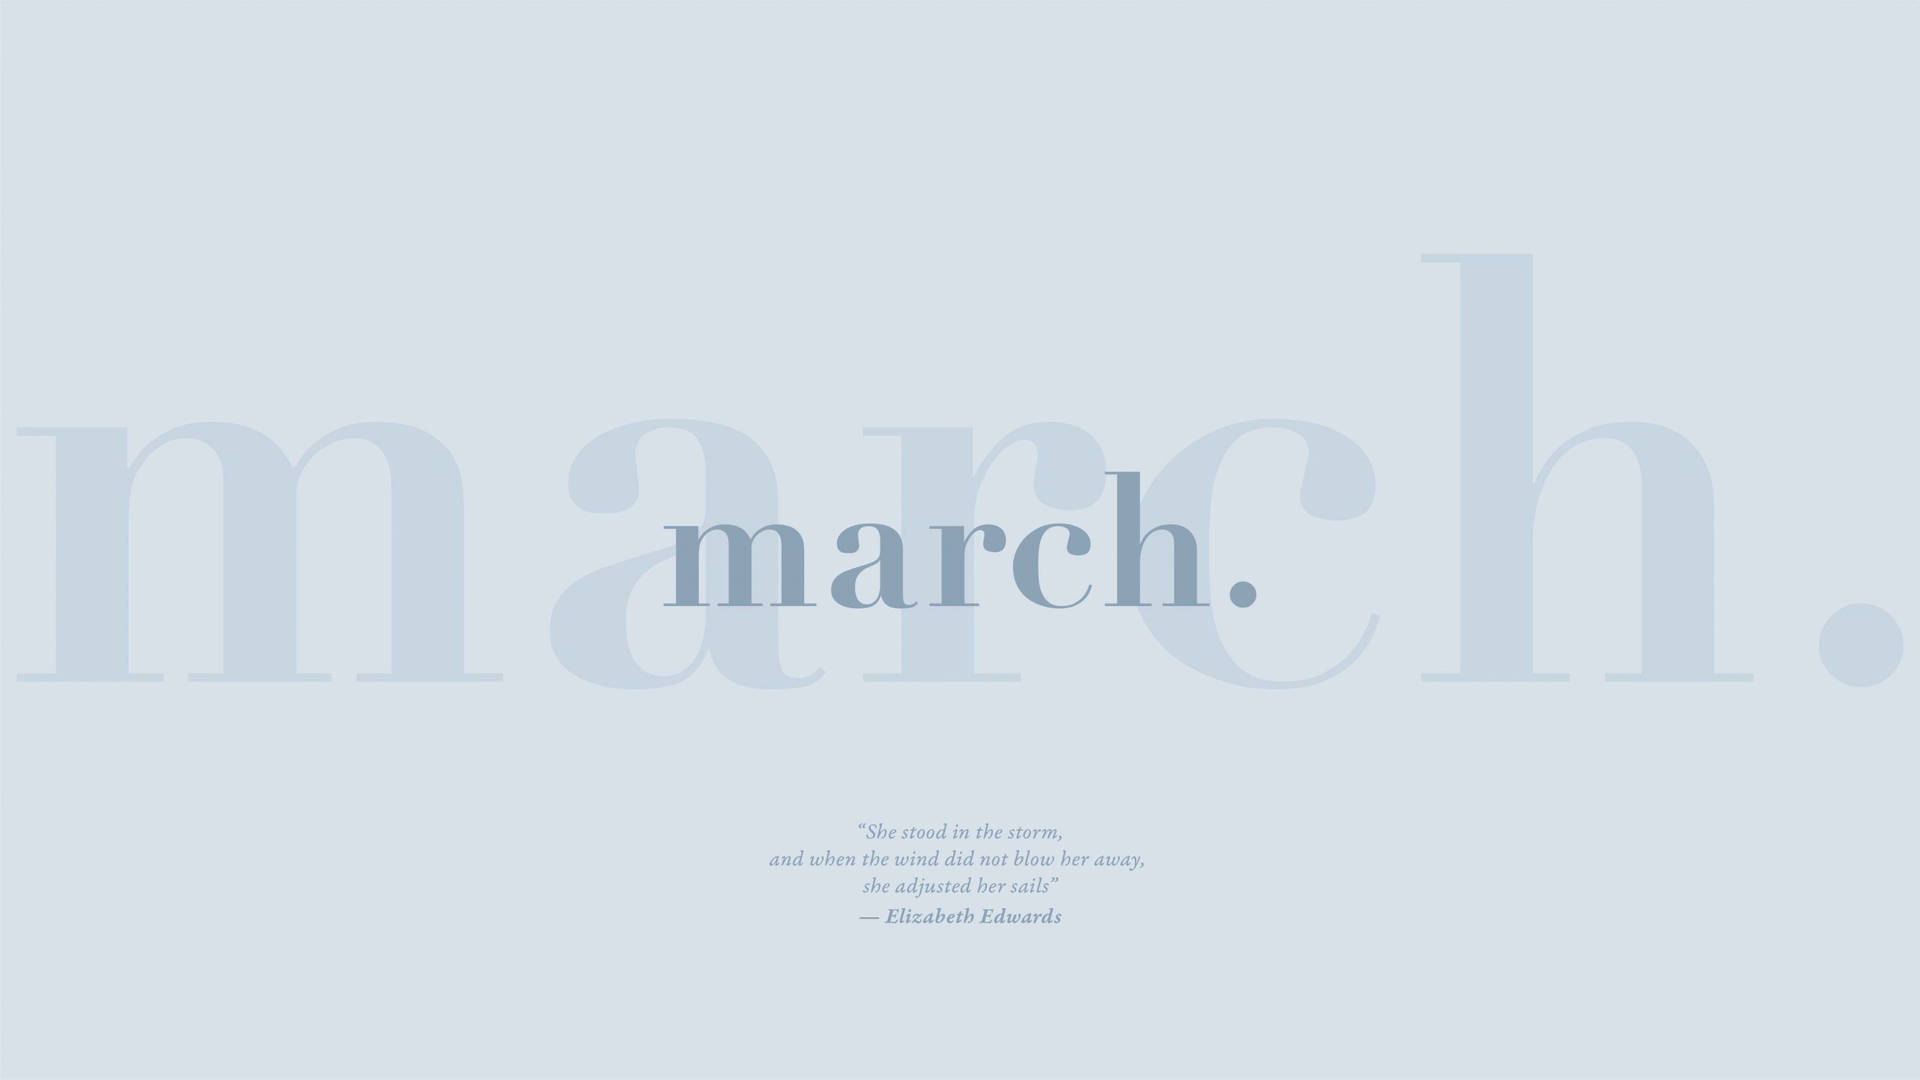 Blue March 2020 Quote